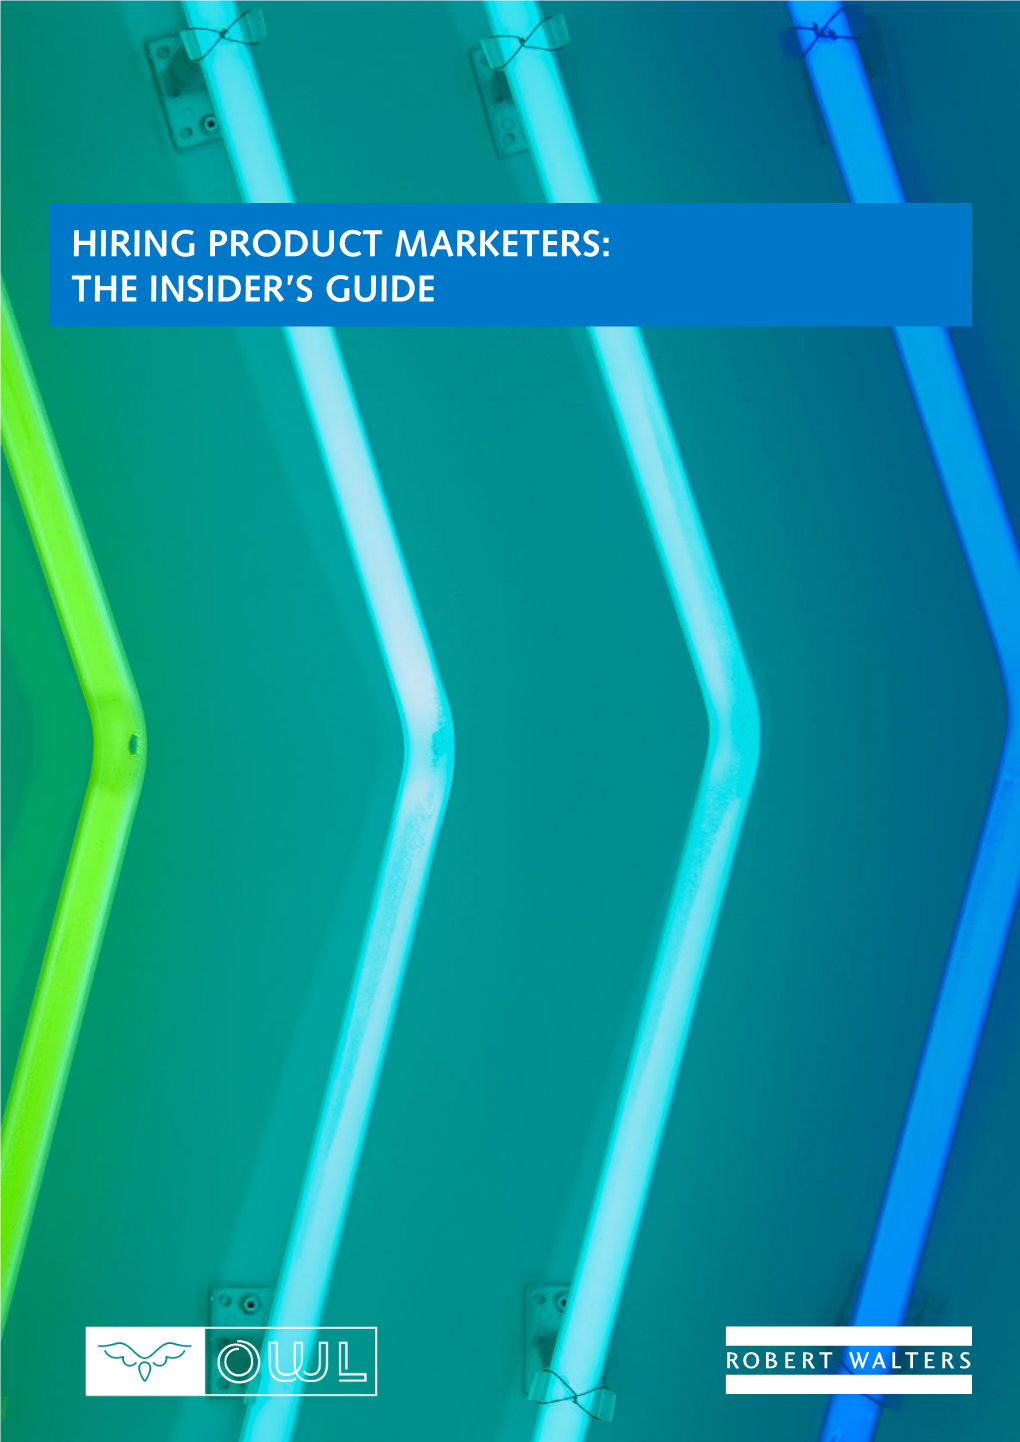 Hiring Product Marketers: the Insider's Guide